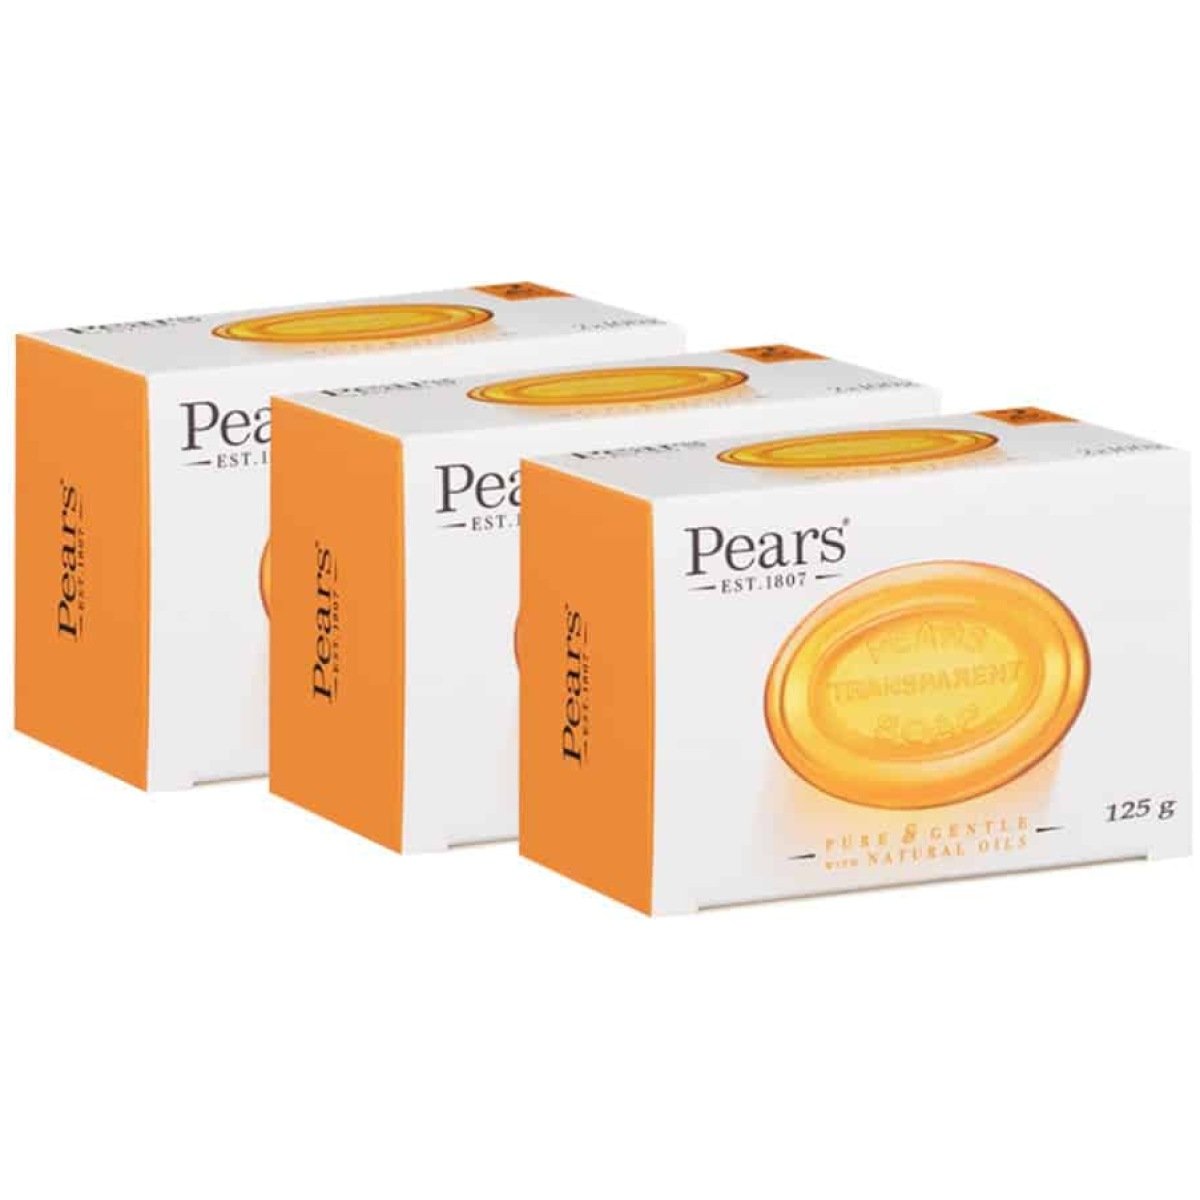 Pears (Imported) Pure and Gentle Soap with Natural Oils 125g (Pack Of 3) (125g*3=375g)